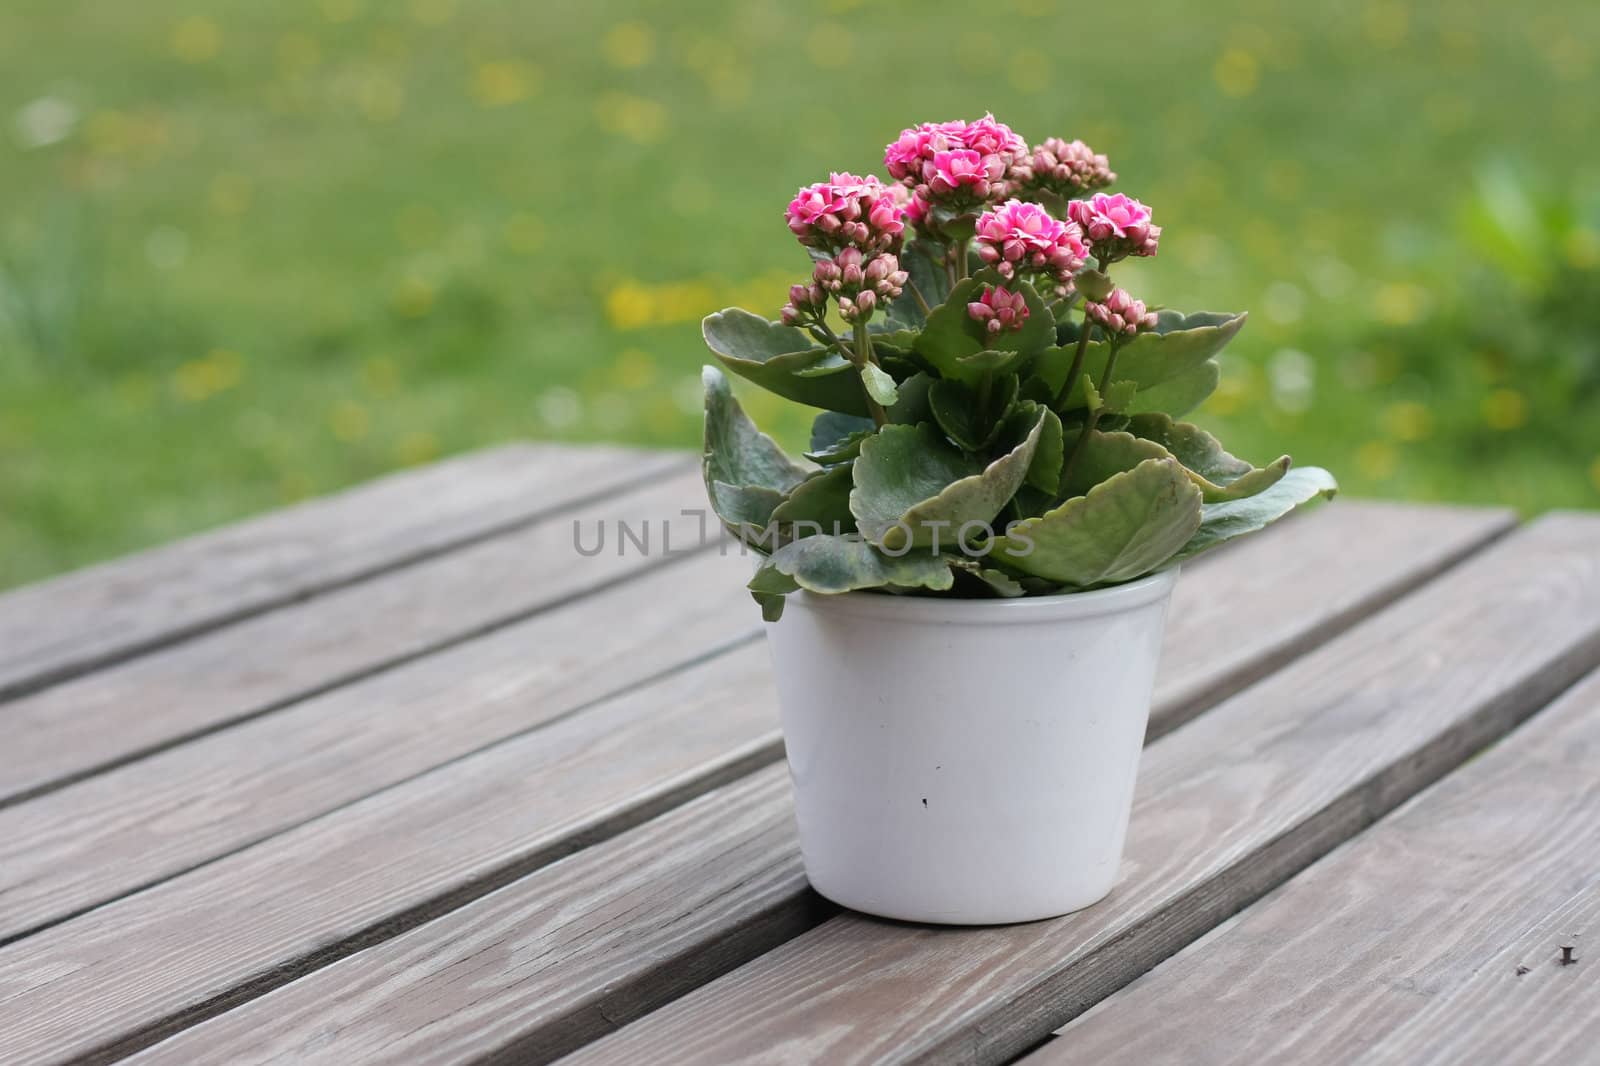 Cute little pot plant on outdoor table.